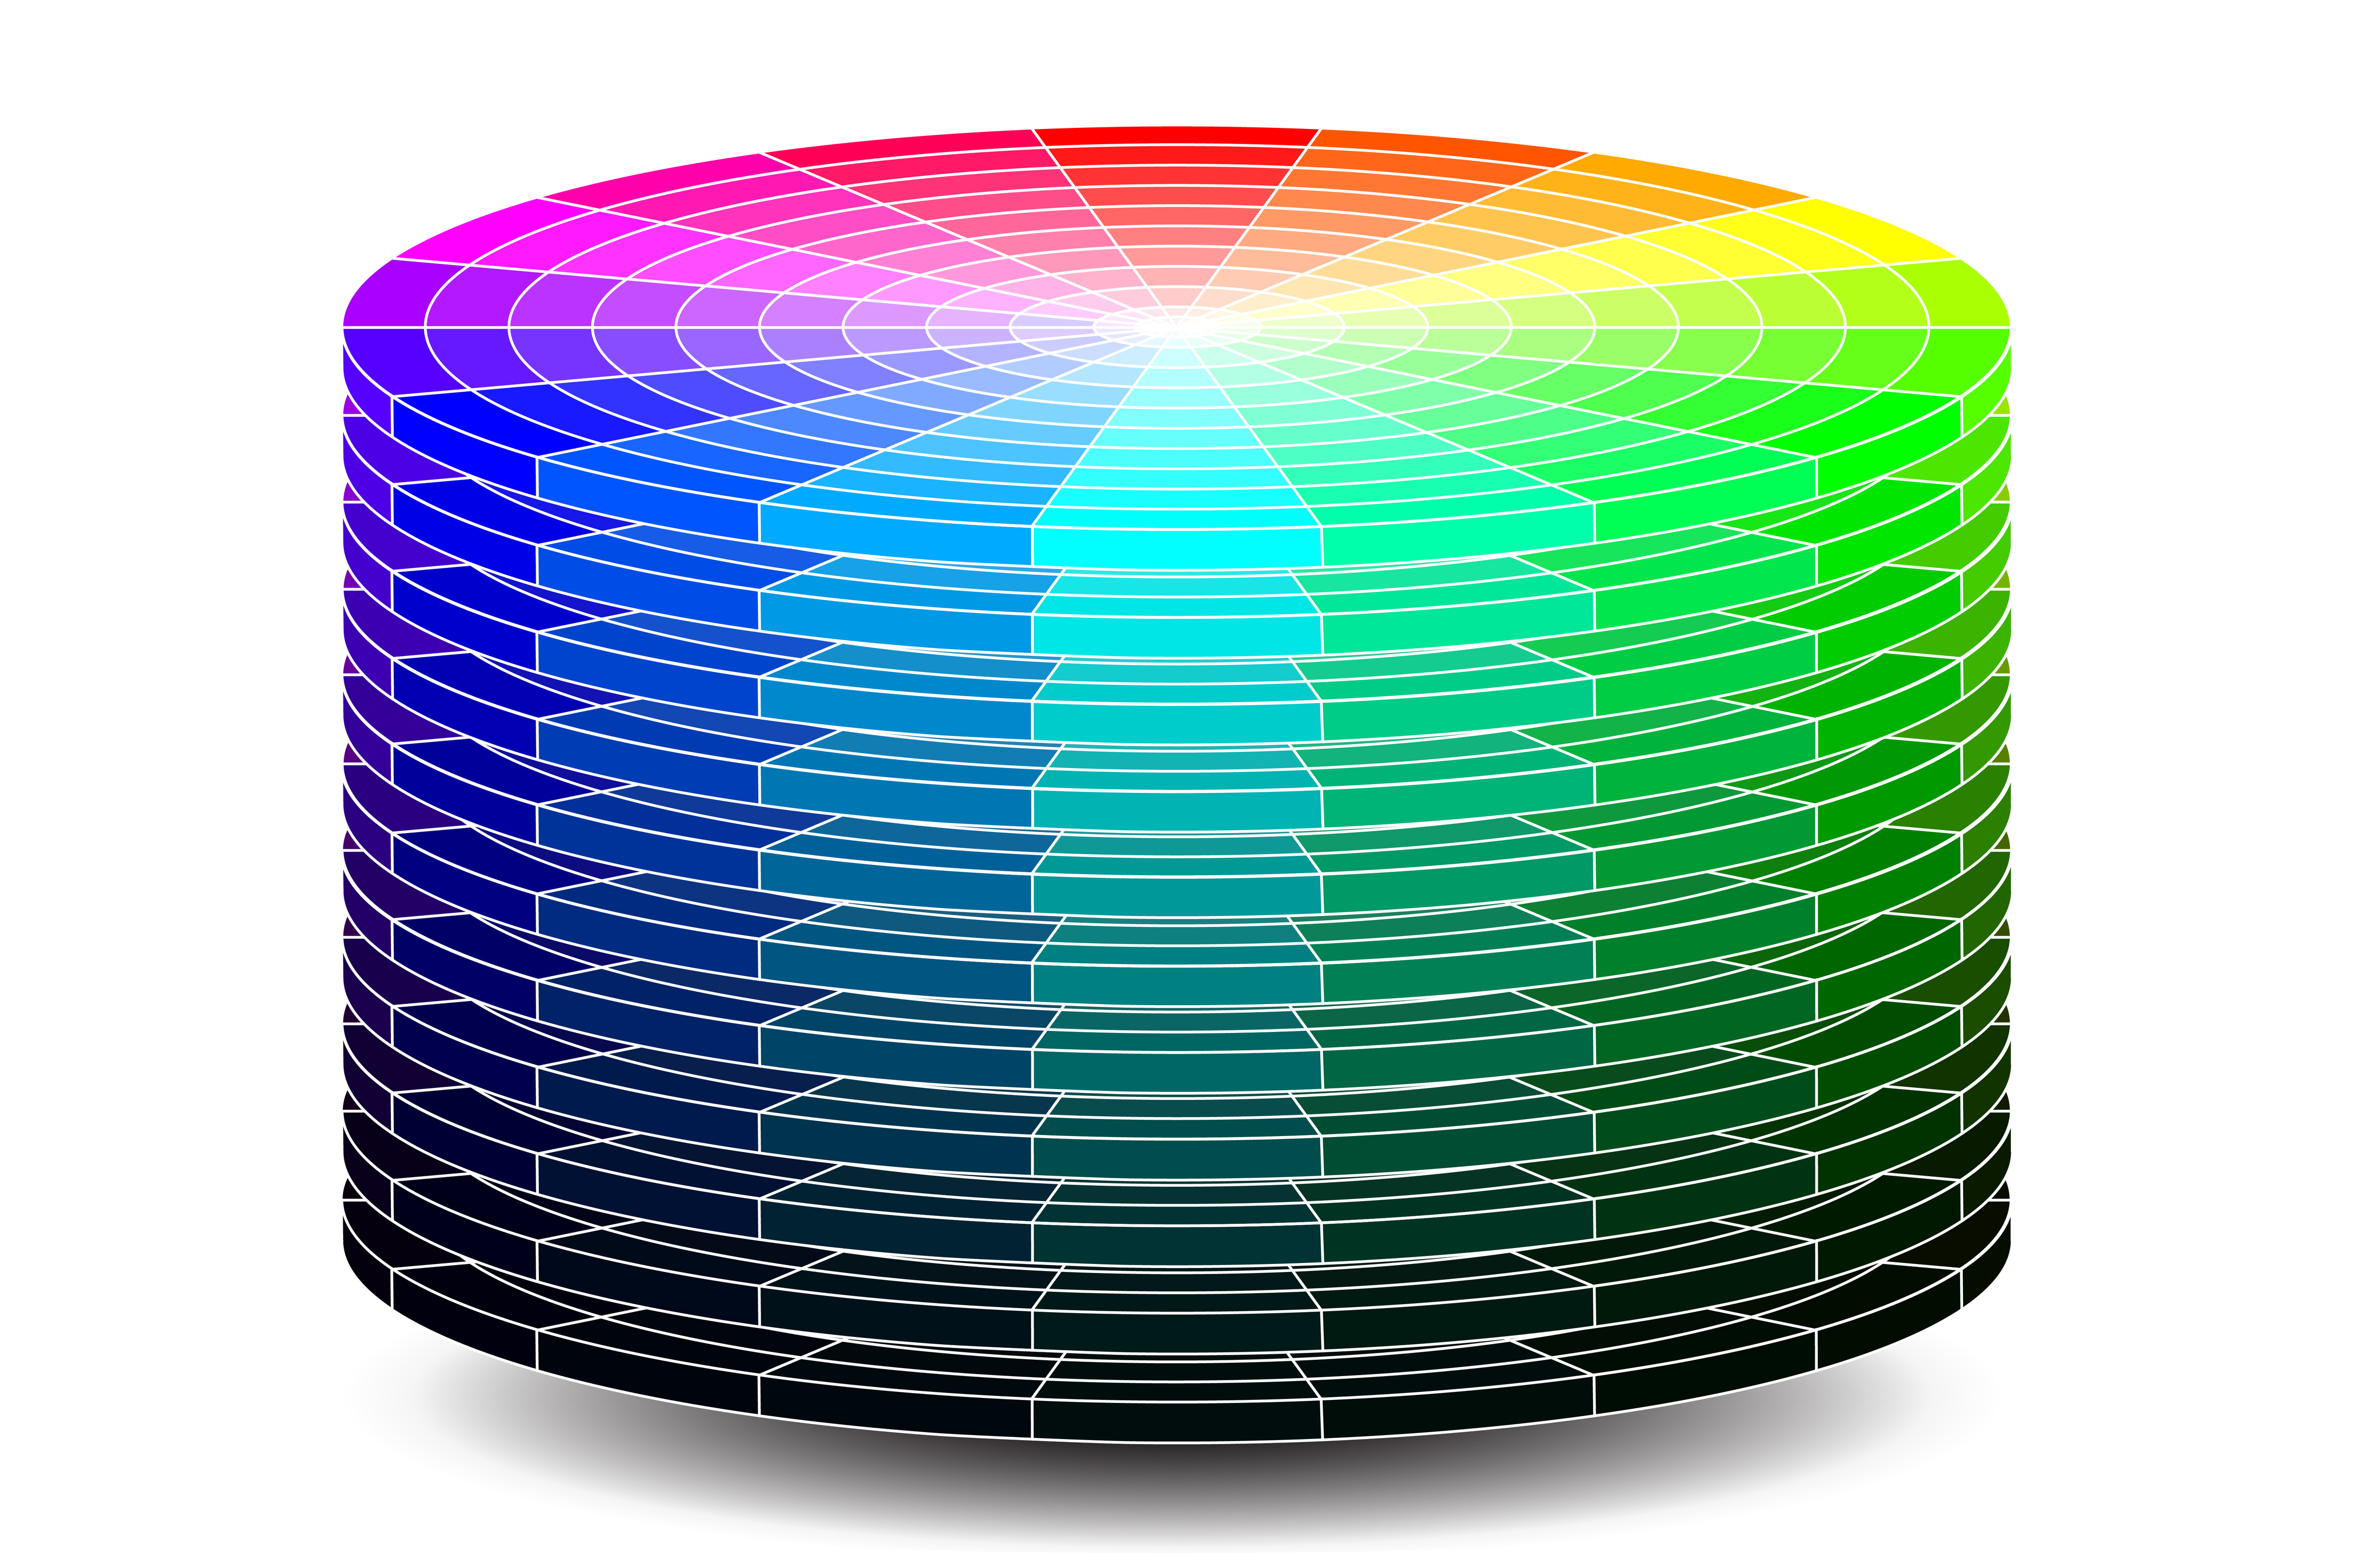 RGB - HSB Colour model - Disks showing Hue, Saturation and Brightness